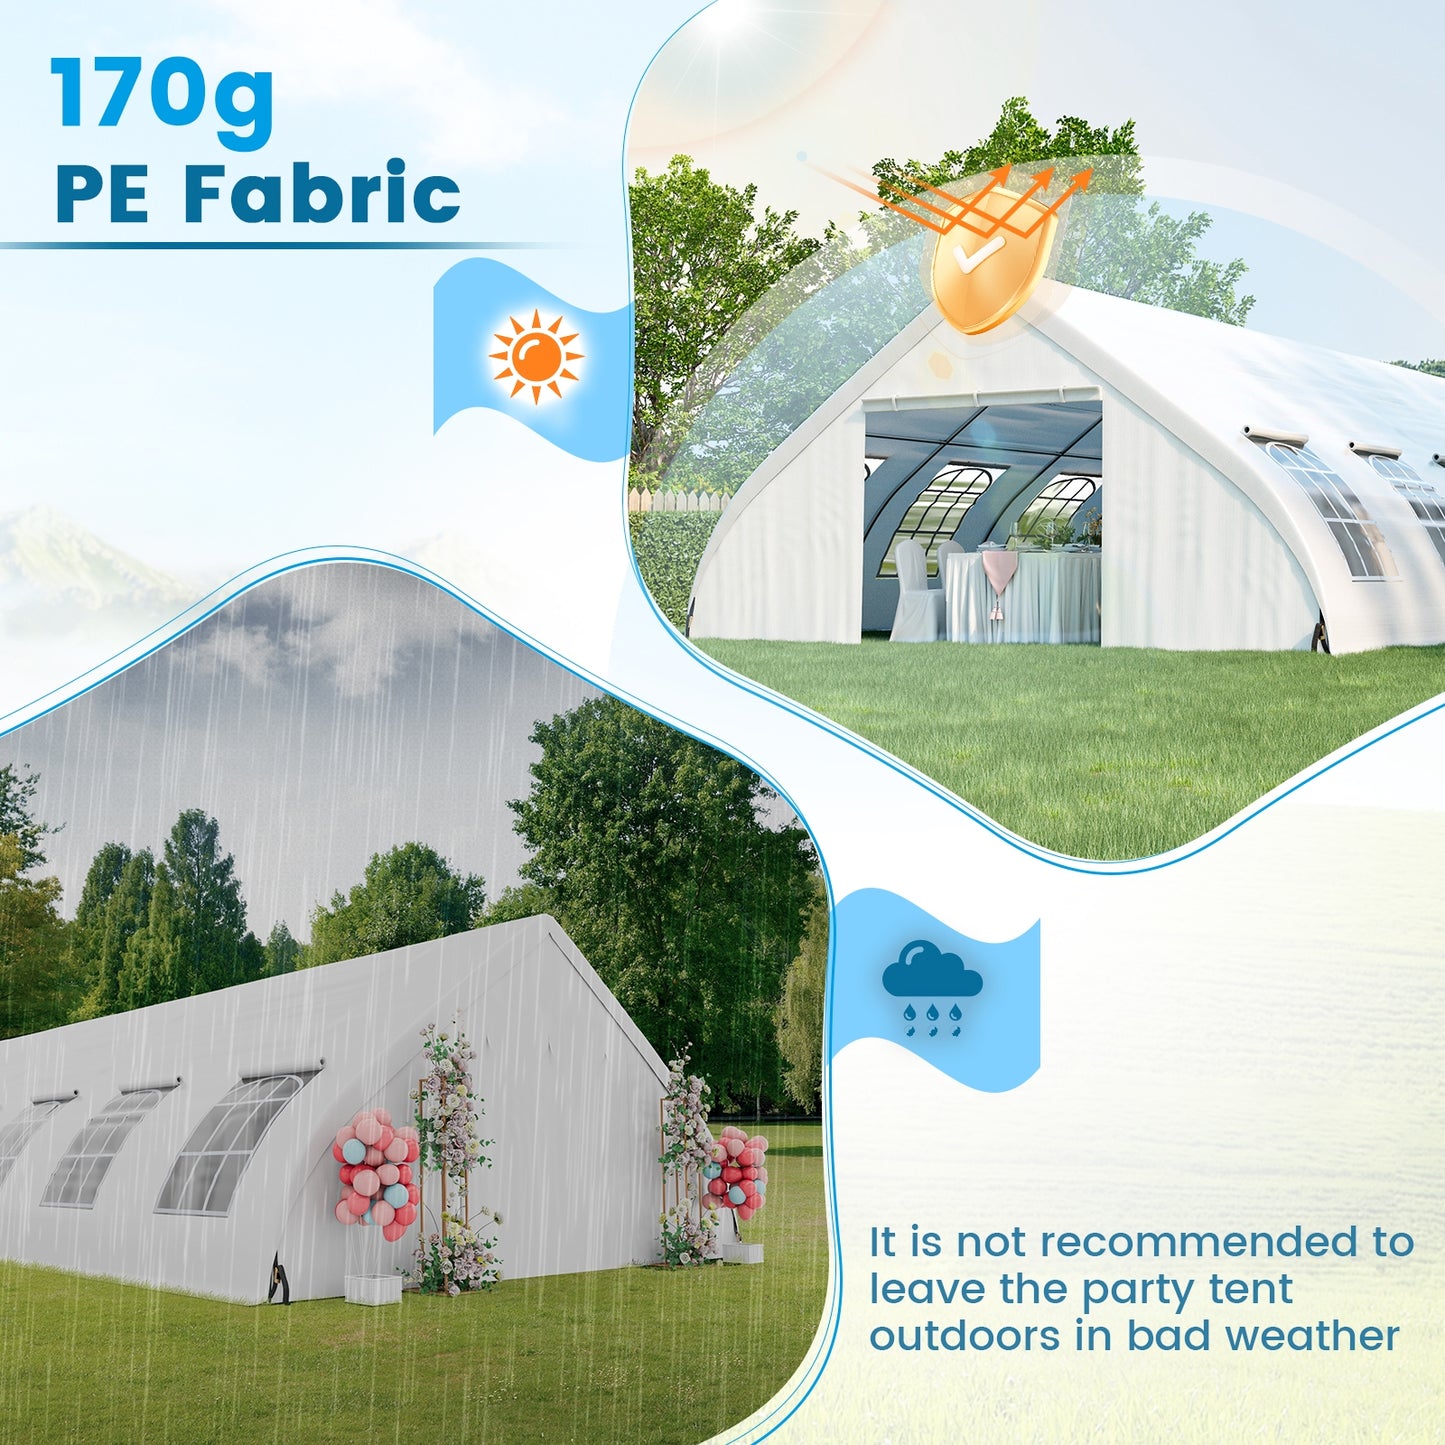 20 x 40 FT Peach Shaped Party Tent Wedding Canopy with Zipper Doors-White